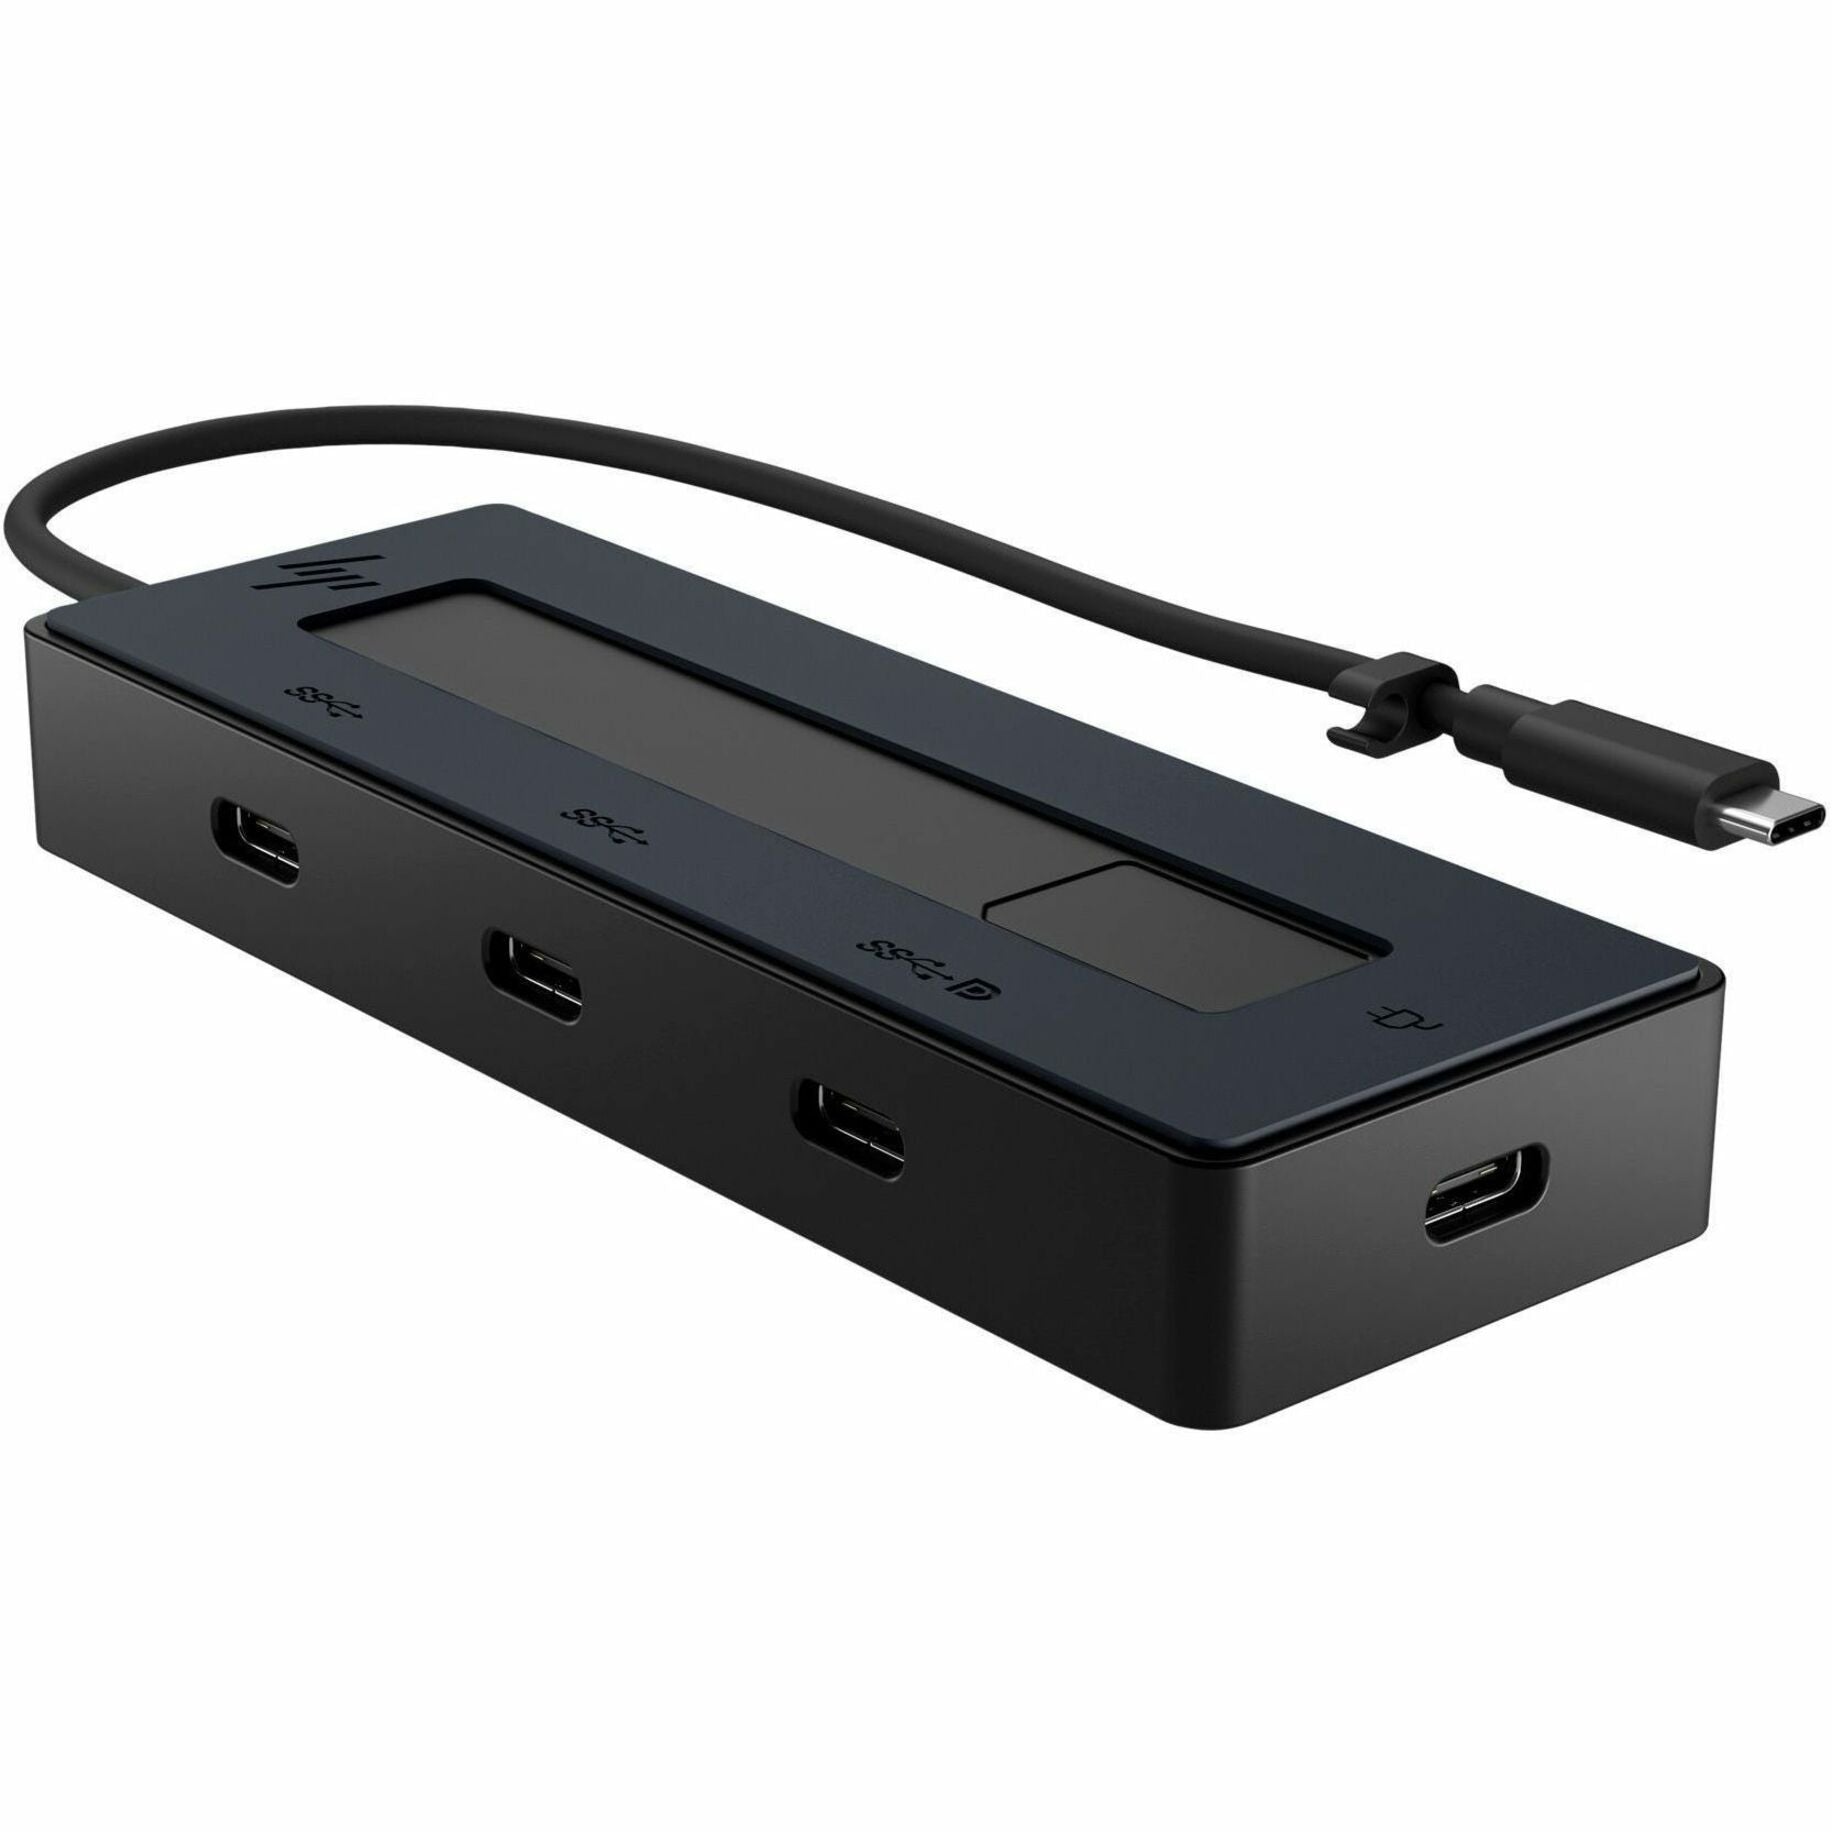 HP Docking Station, USB-C 4K Portable Hub with 65W Power Delivery